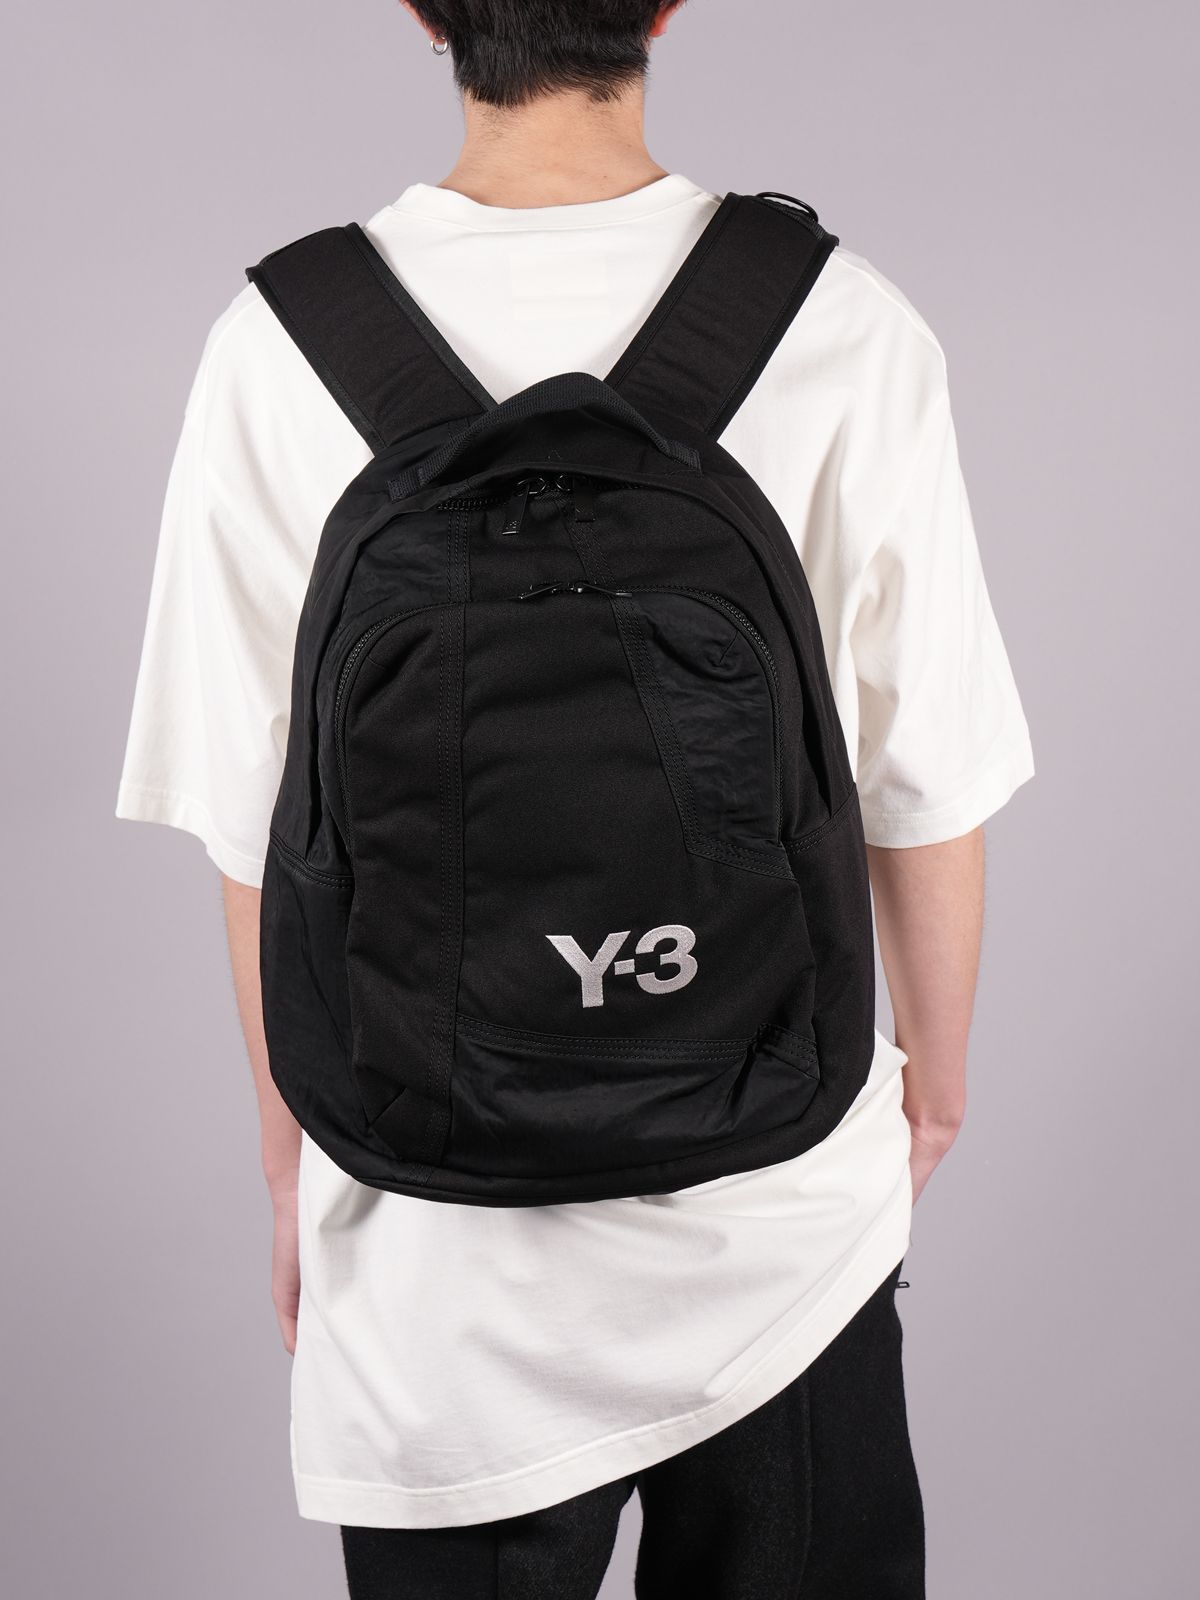 Y-3 - 【ラスト1点】 Y-3 CLASSIC BACKPACK / ワイスリー クラシック